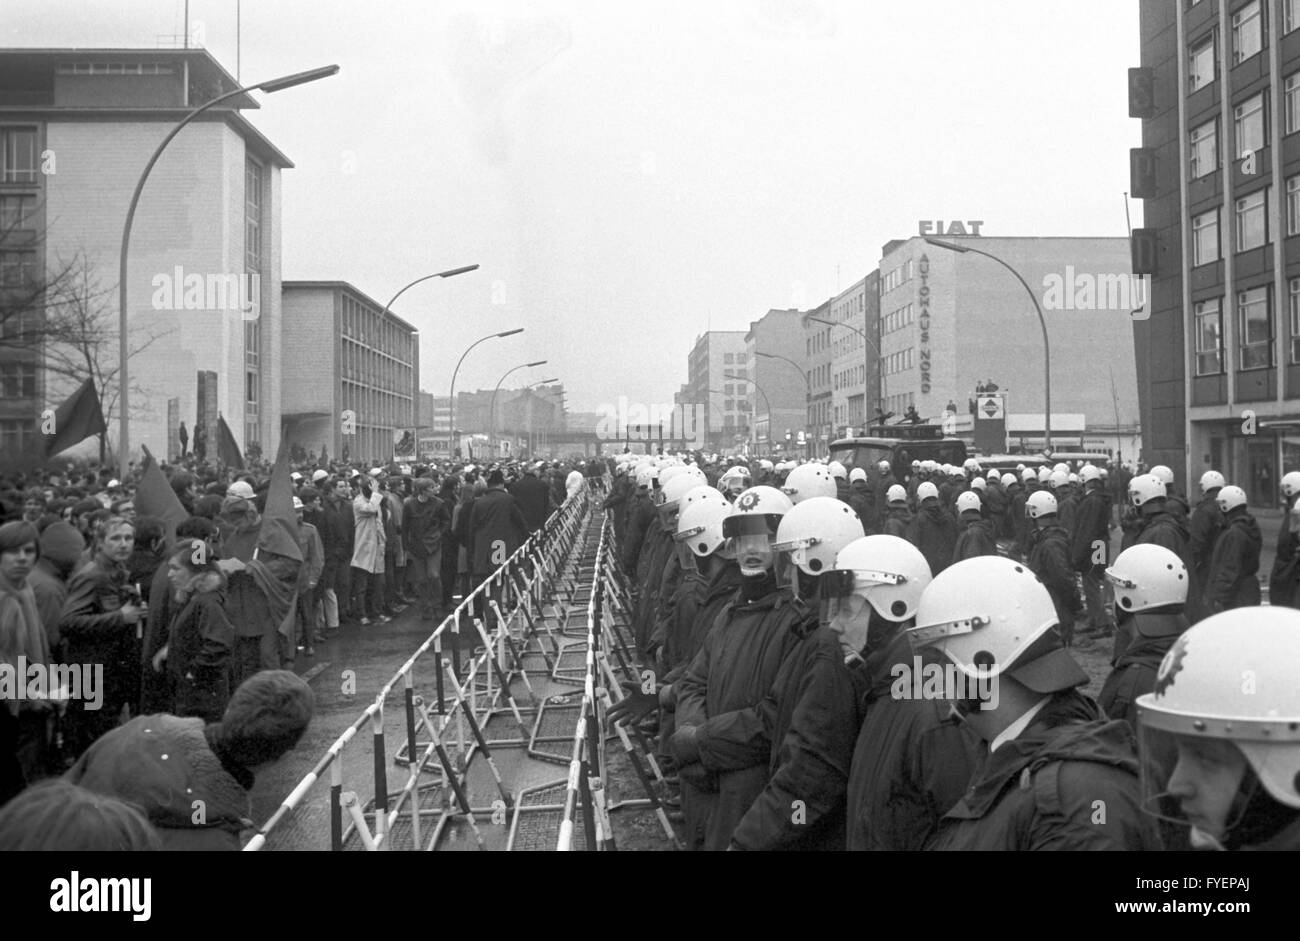 About 1,000 members, primarily students, of the APO (extra-parliamentary opposition) demonstrate against the SPD on the occassion of the 50th anniversary of Rosa Luxemburg's and Karl Liebknecht's assassination on 18 January 1969. Stock Photo